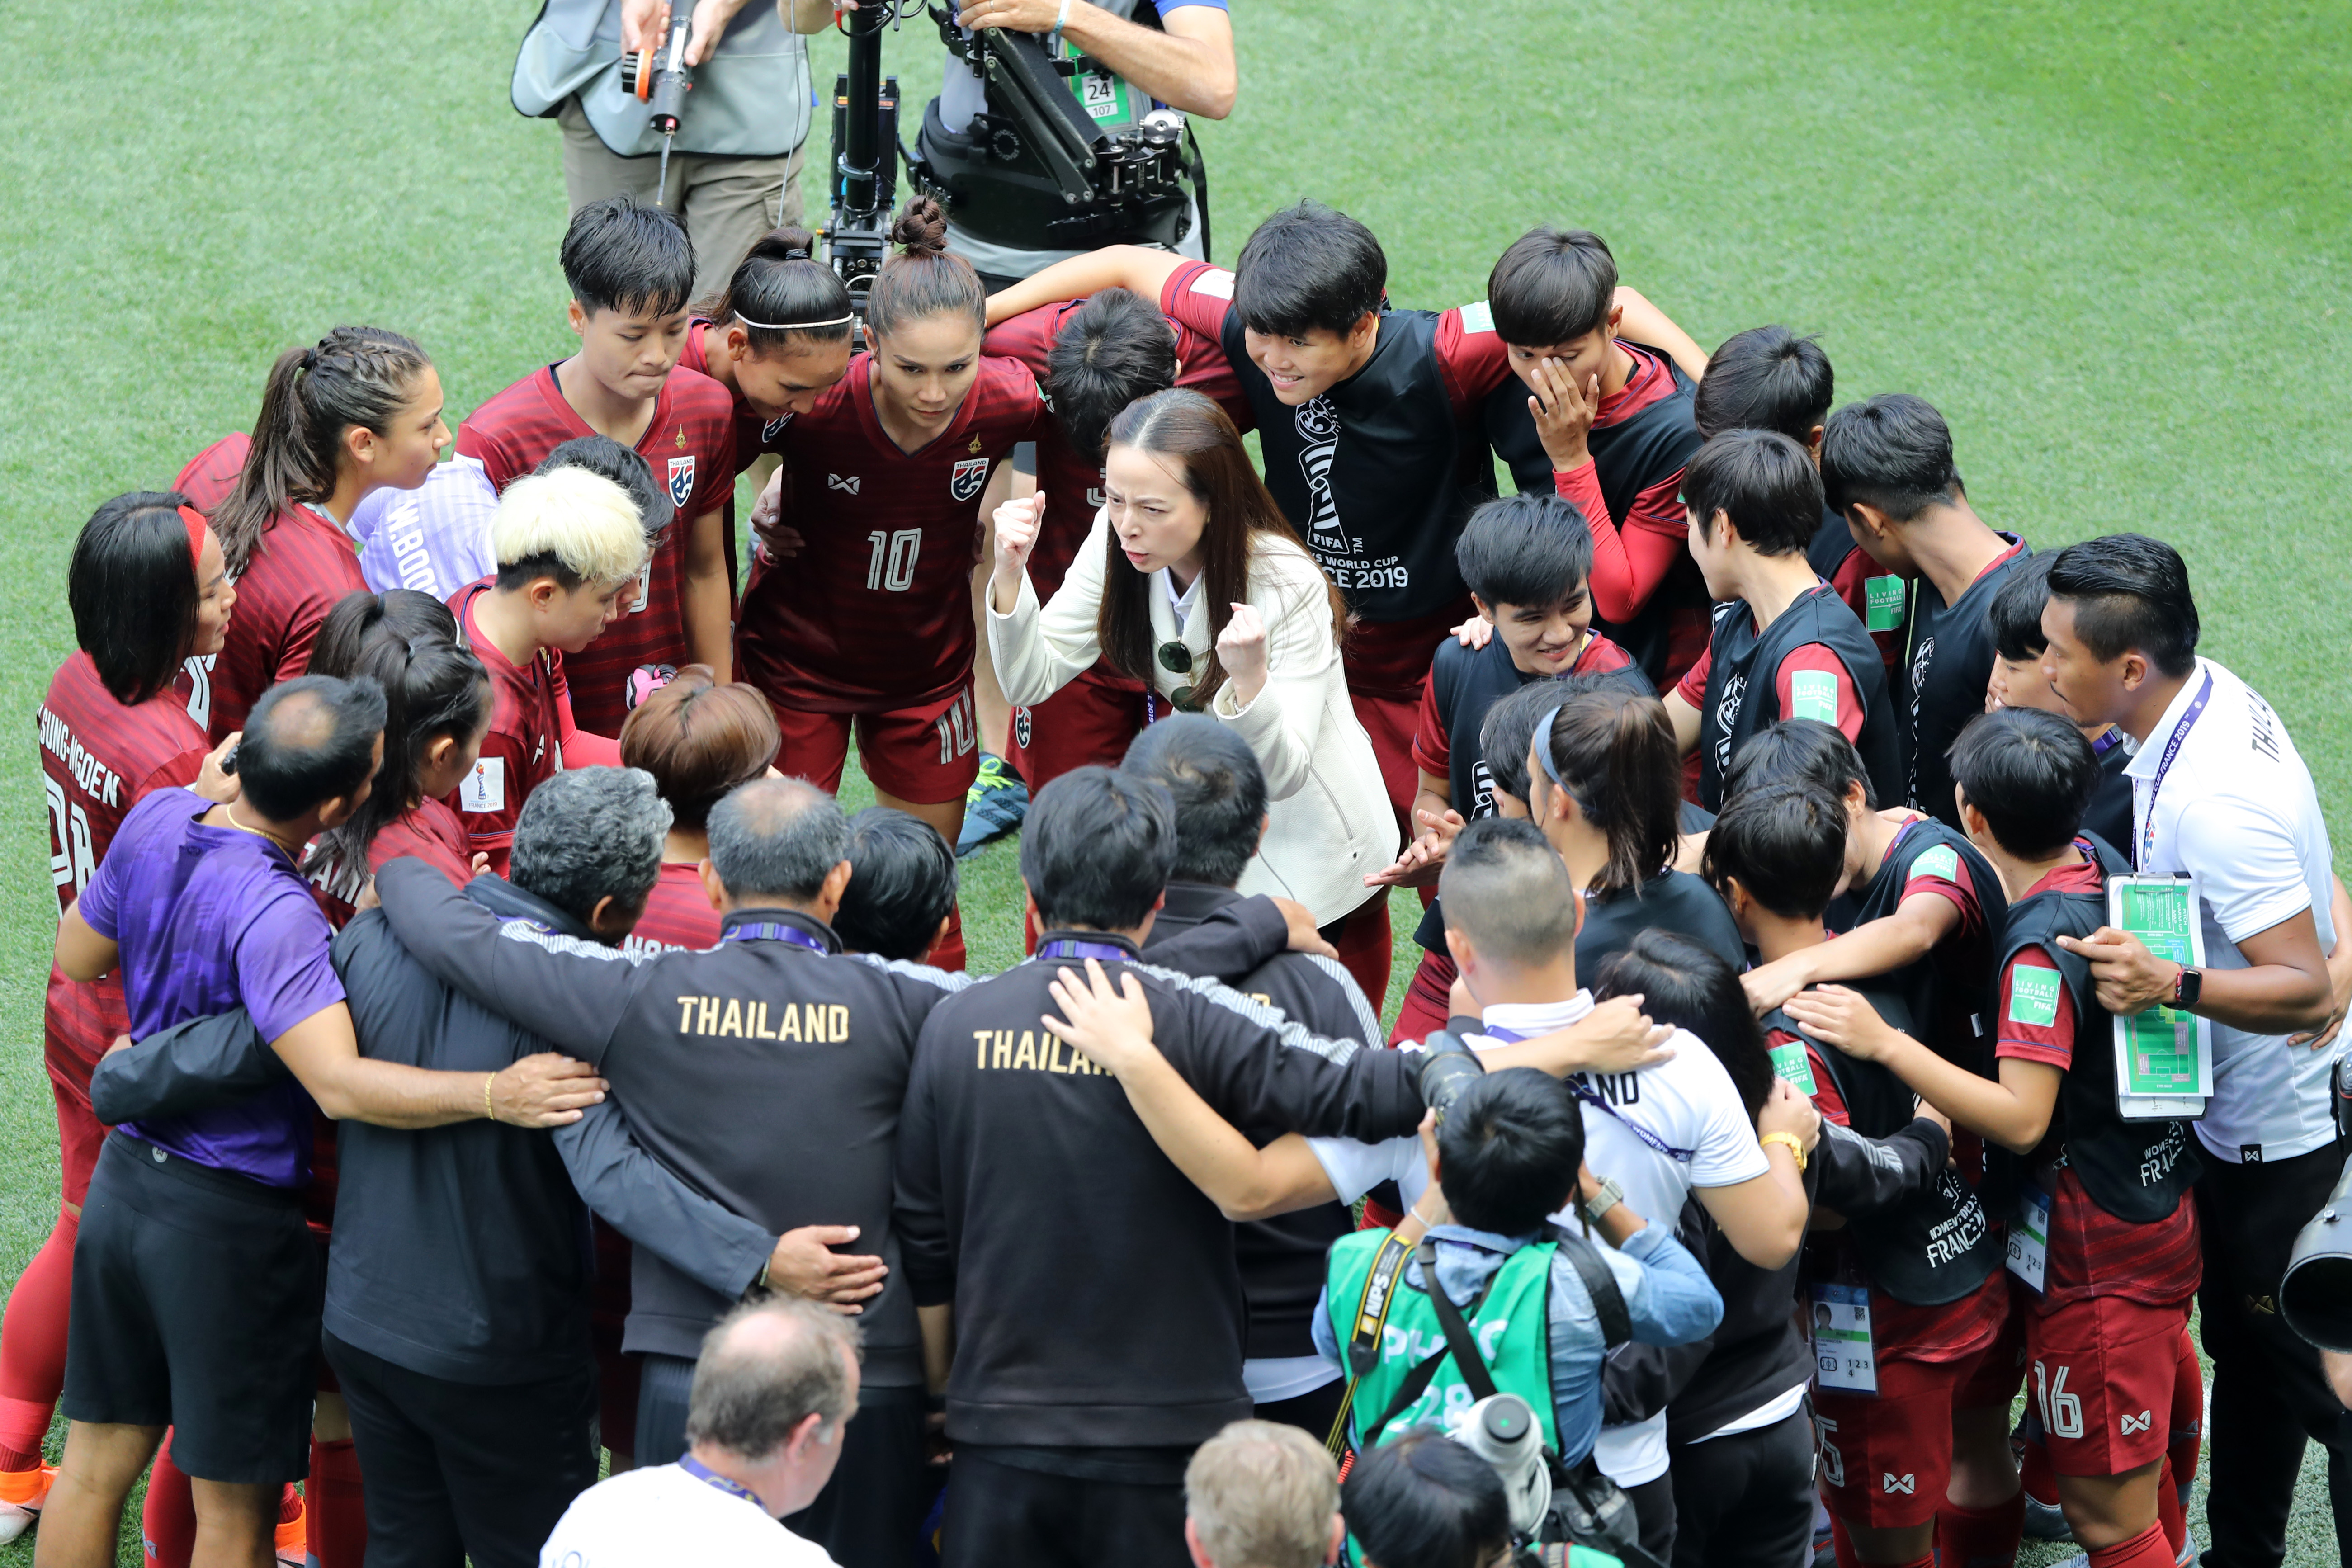 NICE, FRANCE - JUNE 16: The Thailand players and staff form a team huddle prior to the 2019 FIFA Women's World Cup France group F match between Sweden and Thailand at Stade de Nice on June 16, 2019 in Nice, France. (Photo by Elsa/Getty Images)